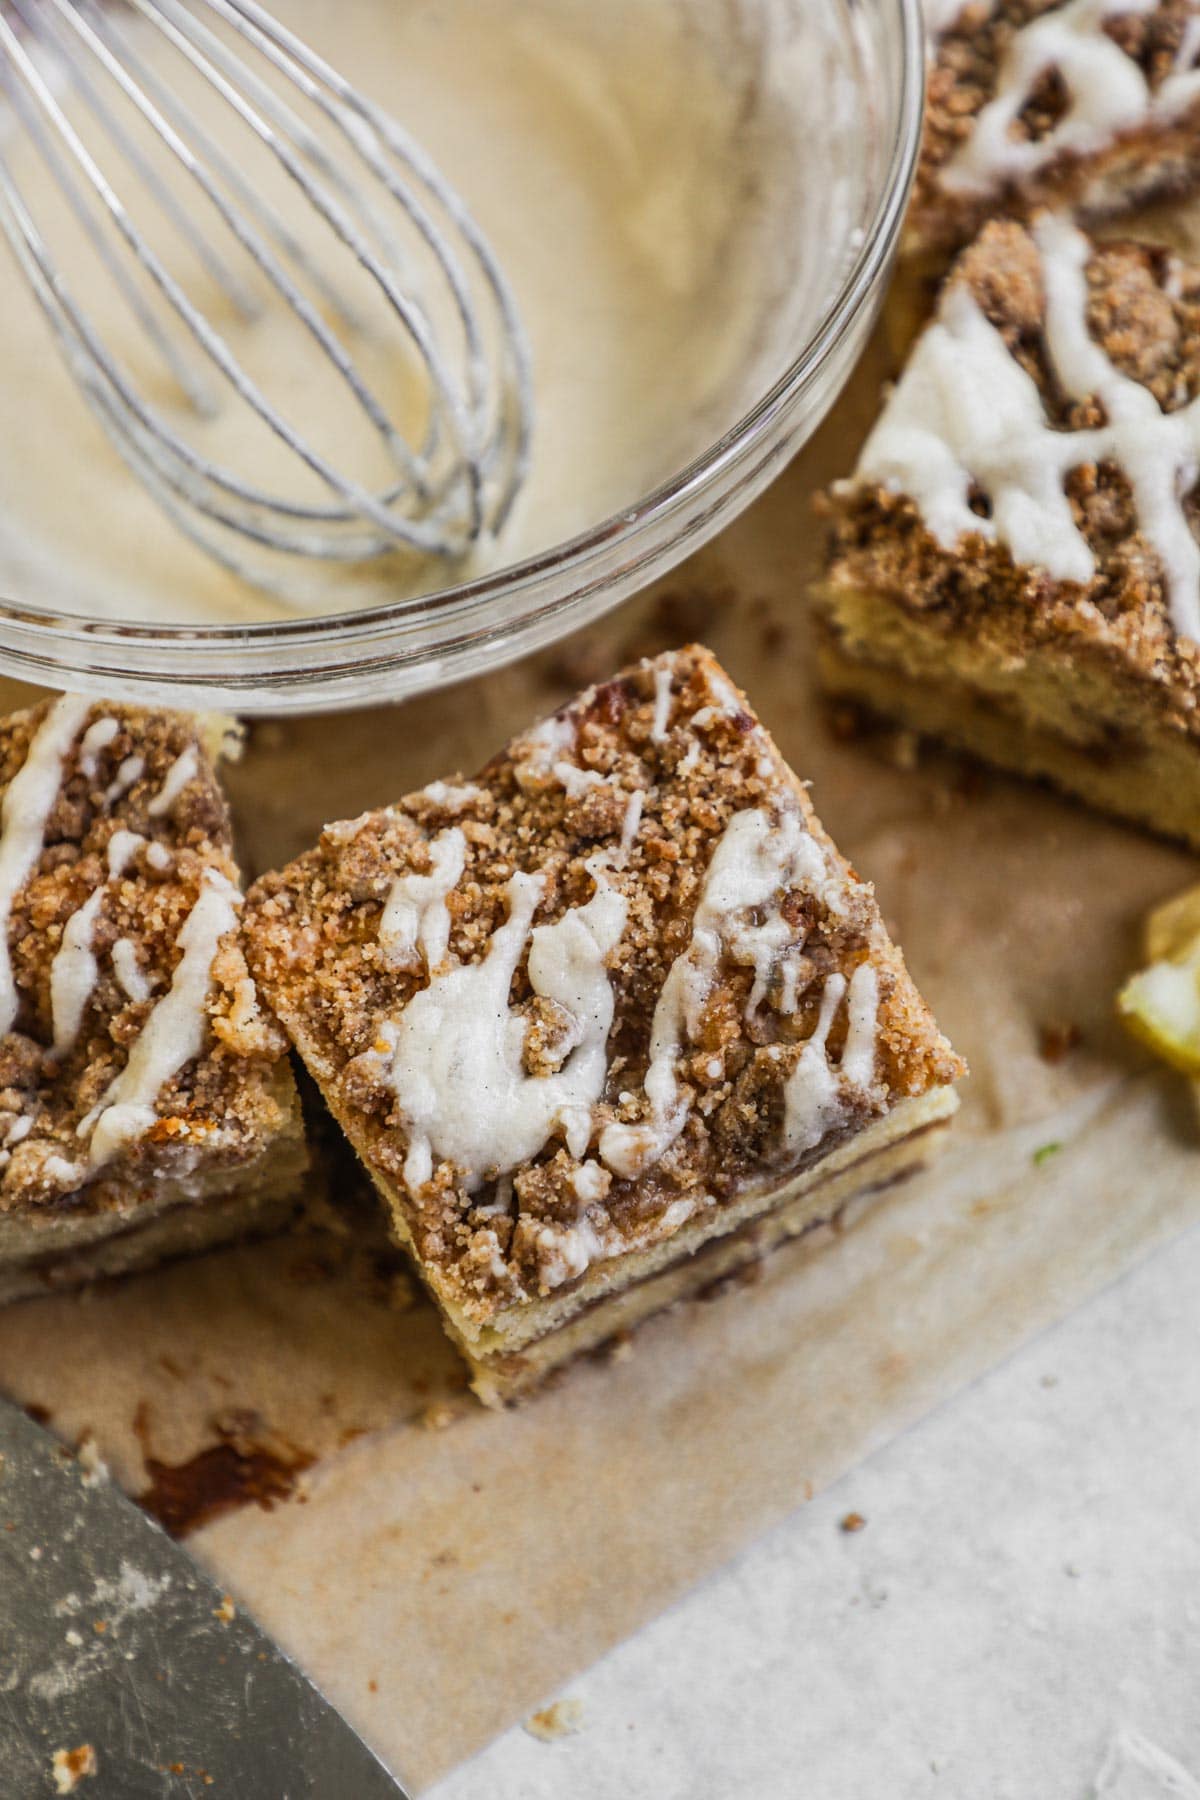 Easy classic vanilla bean icing drizzled on a slice of coffee cake.